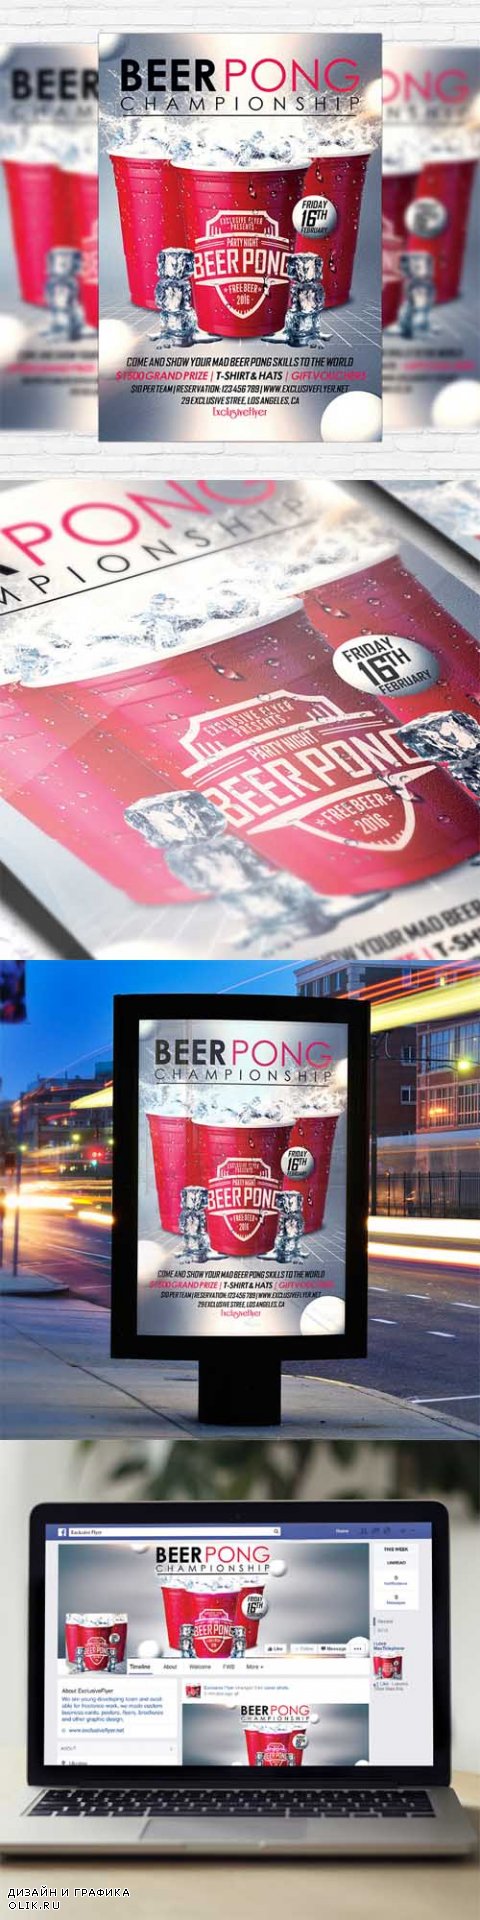 Flyer Template - Beer Pong Championship + Facebook Cover